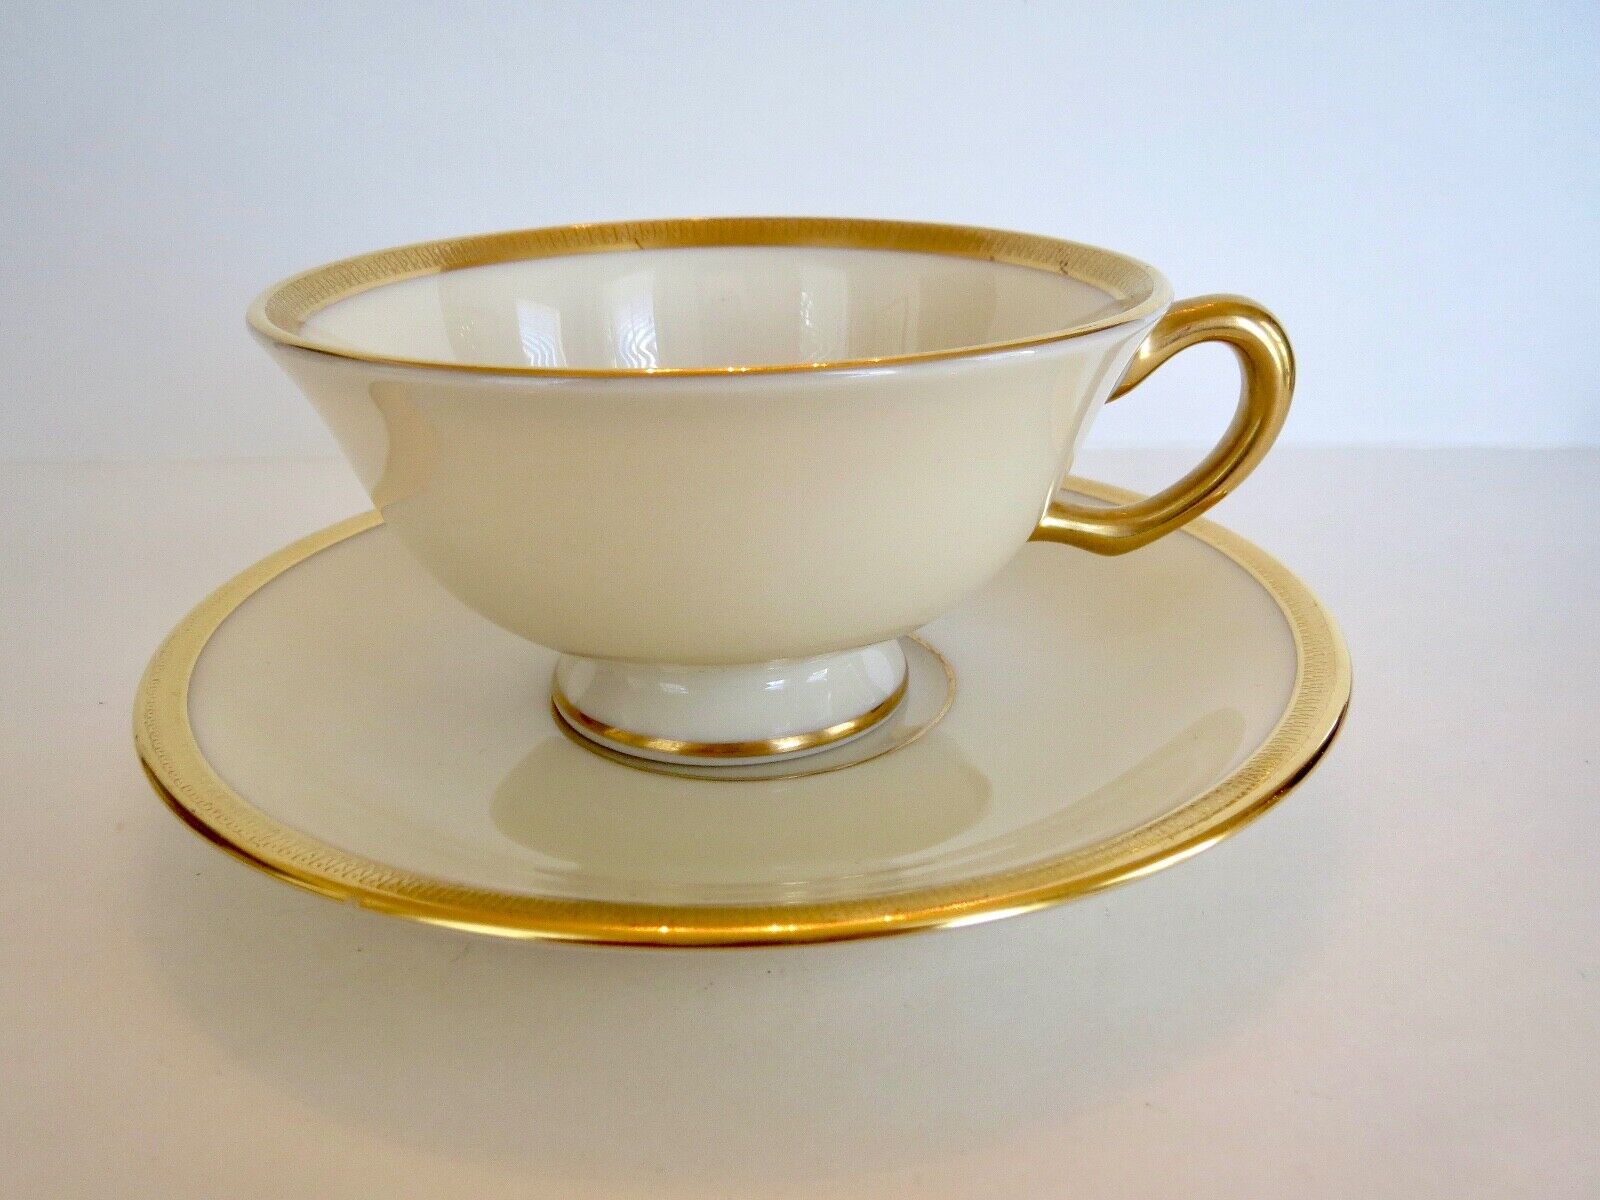 8 Sets of LENOX TUXEDO CUPS & SAUCERS Off White with GOLD TRIM